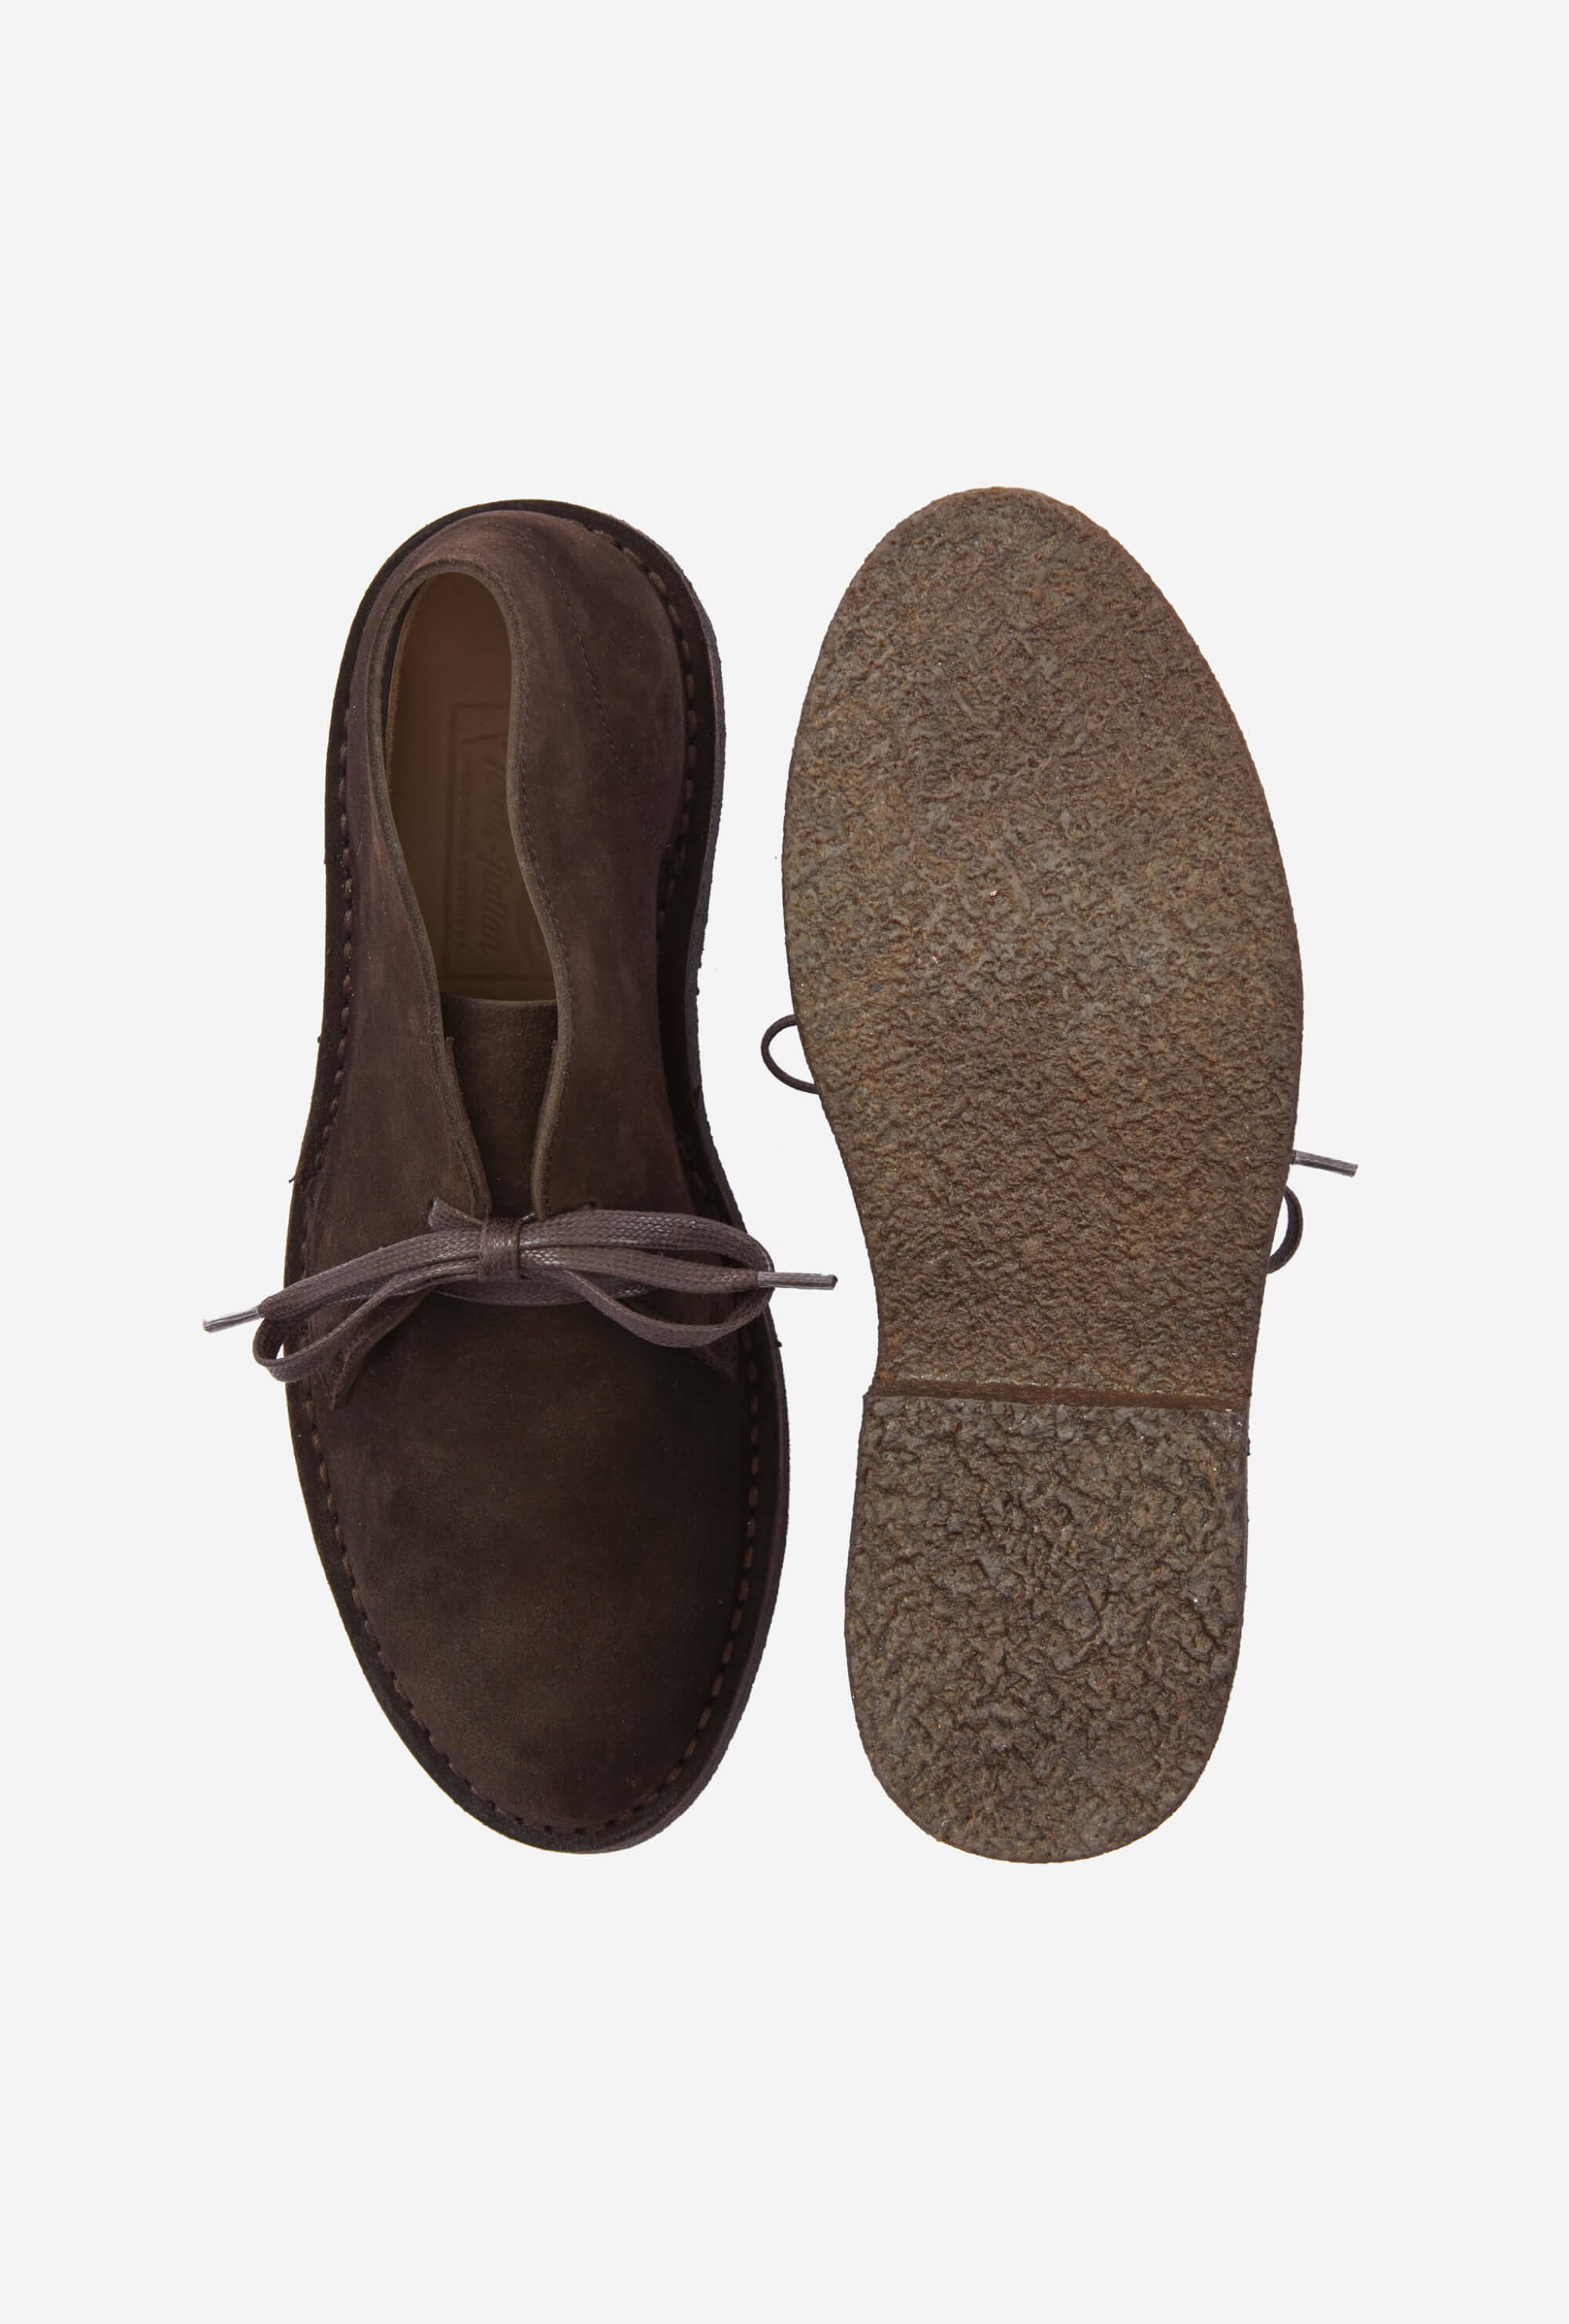 Made-To-Order Desert Boots